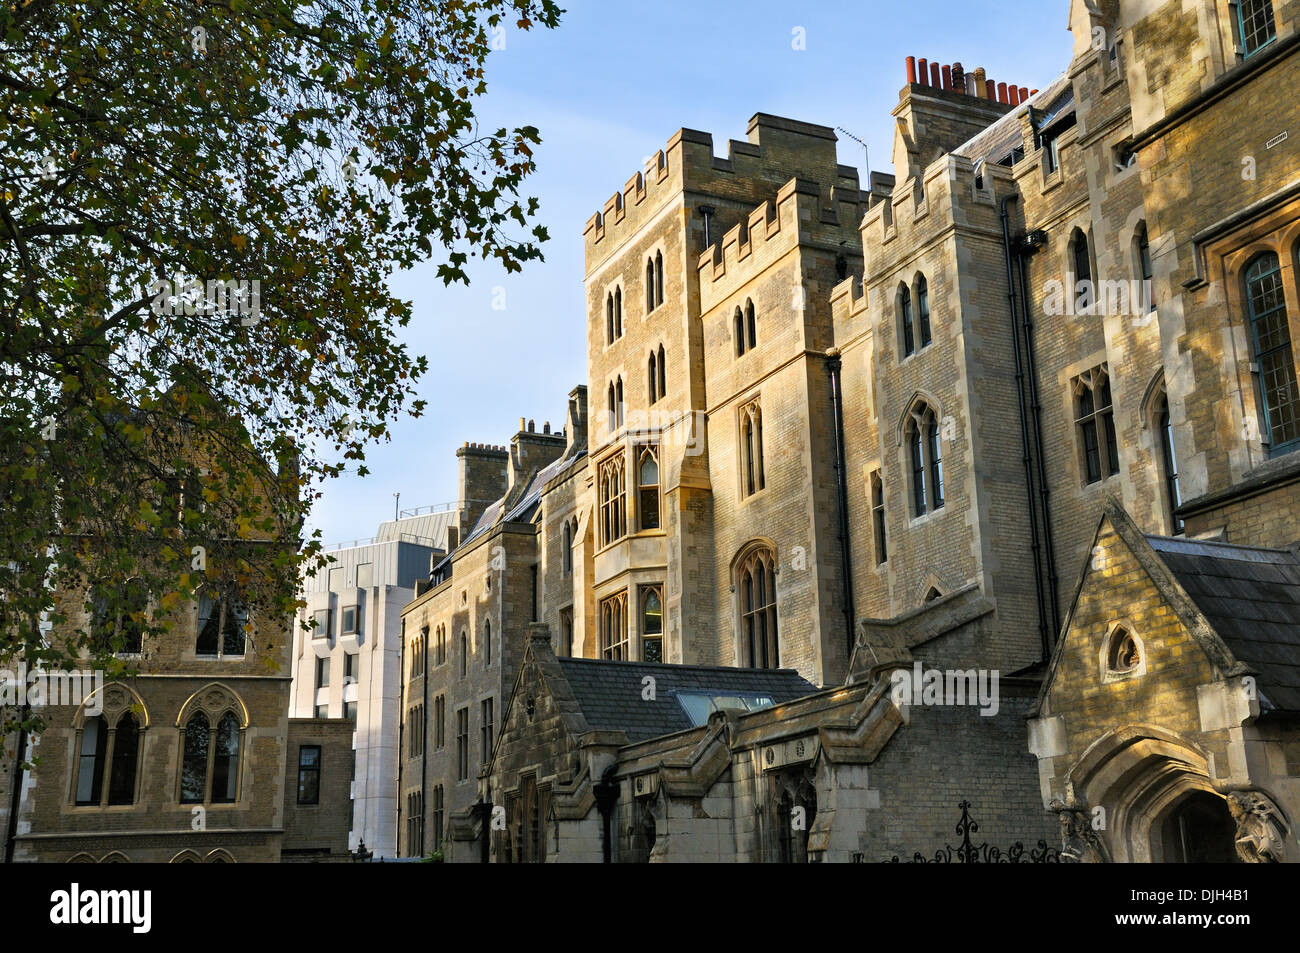 Dean's Yard, Westminster, London, England, Regno Unito Foto Stock